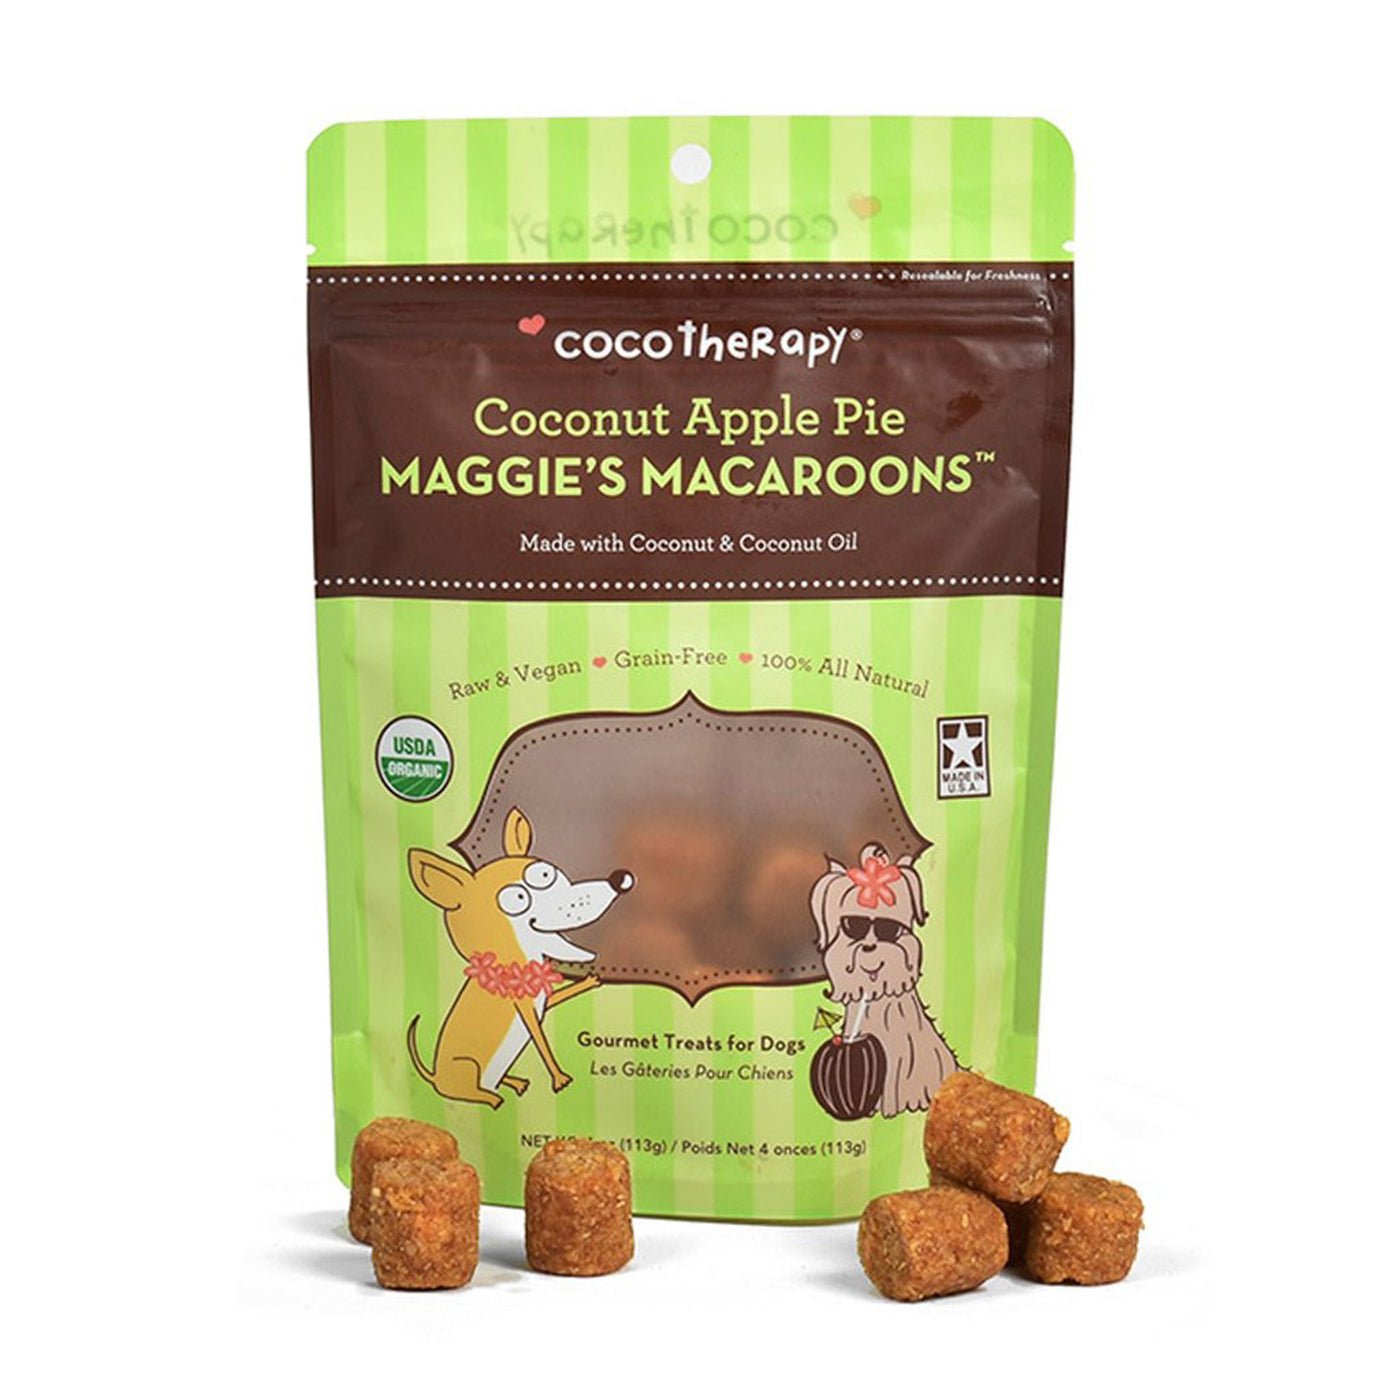 Coco Therapy Coconut Apple Pie Maggie's Macaroons dog treats in pouch with treats in front